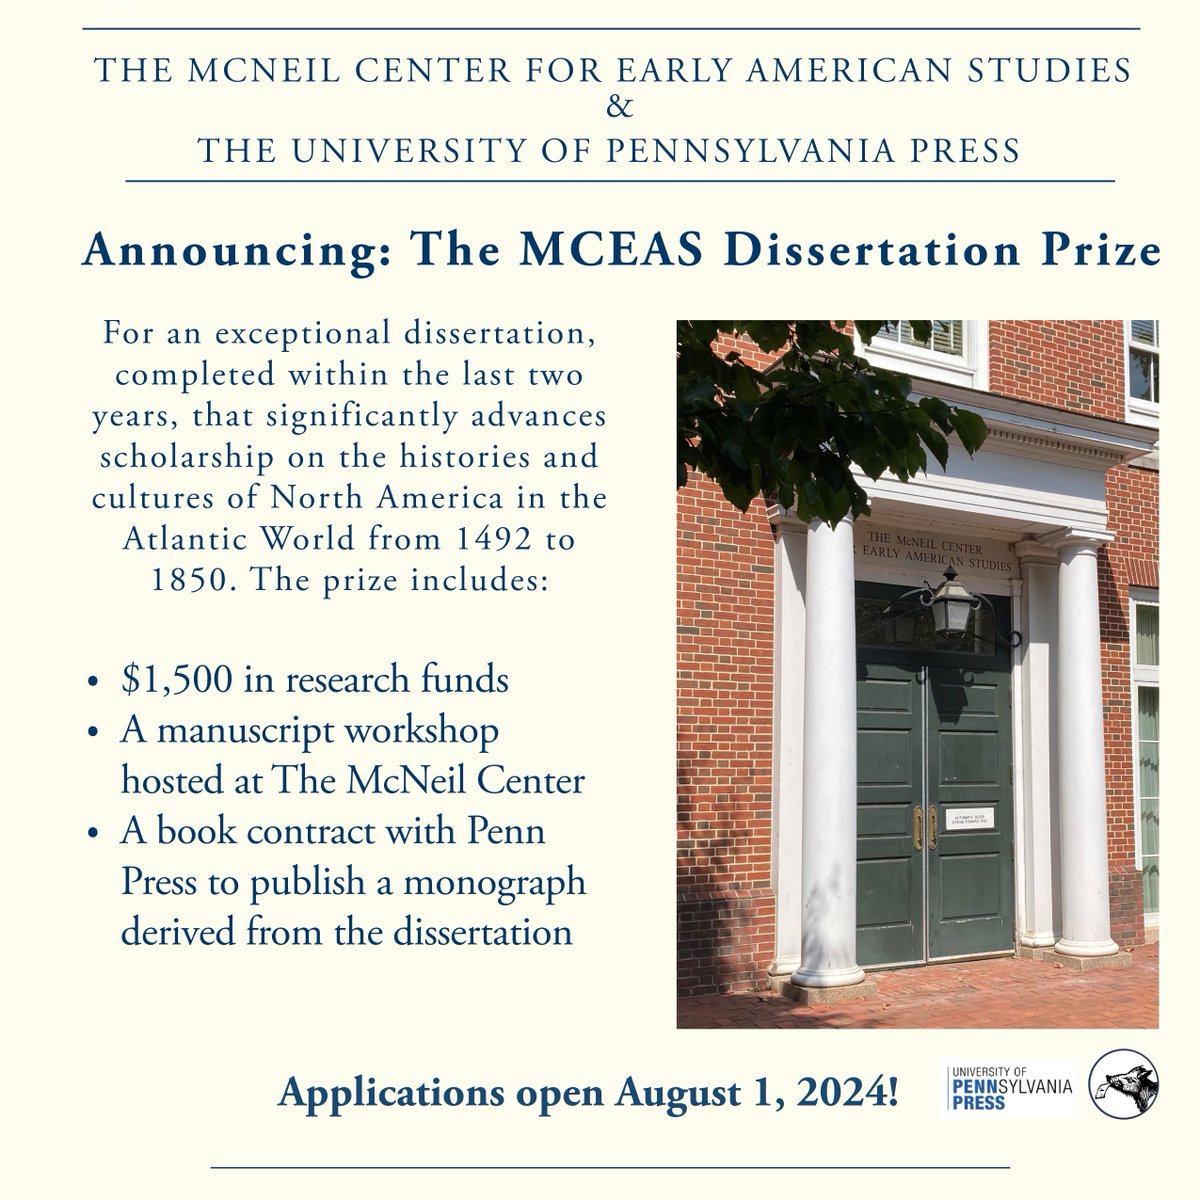 The McNeil Center & @PennPress will inaugurate a new prize this summer for an exceptional dissertation in early American studies. The award includes a book contract, research funds, and a manuscript workshop at the Center. Applications open August 1!